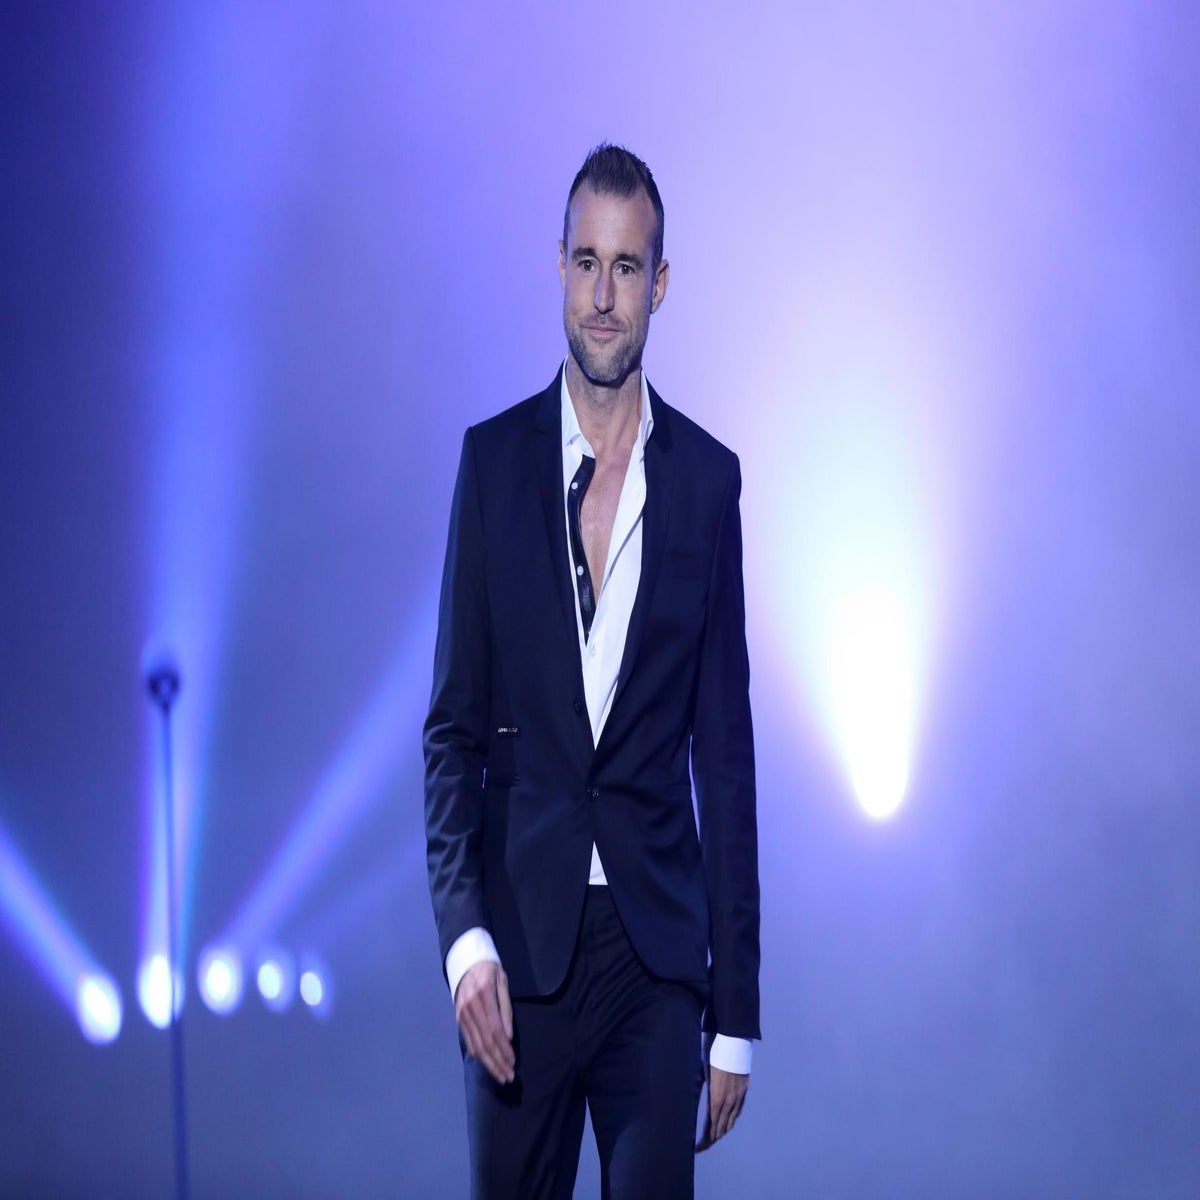 Philipp Plein fat-shames journalist who gave his fashion show a bad review, The Independent